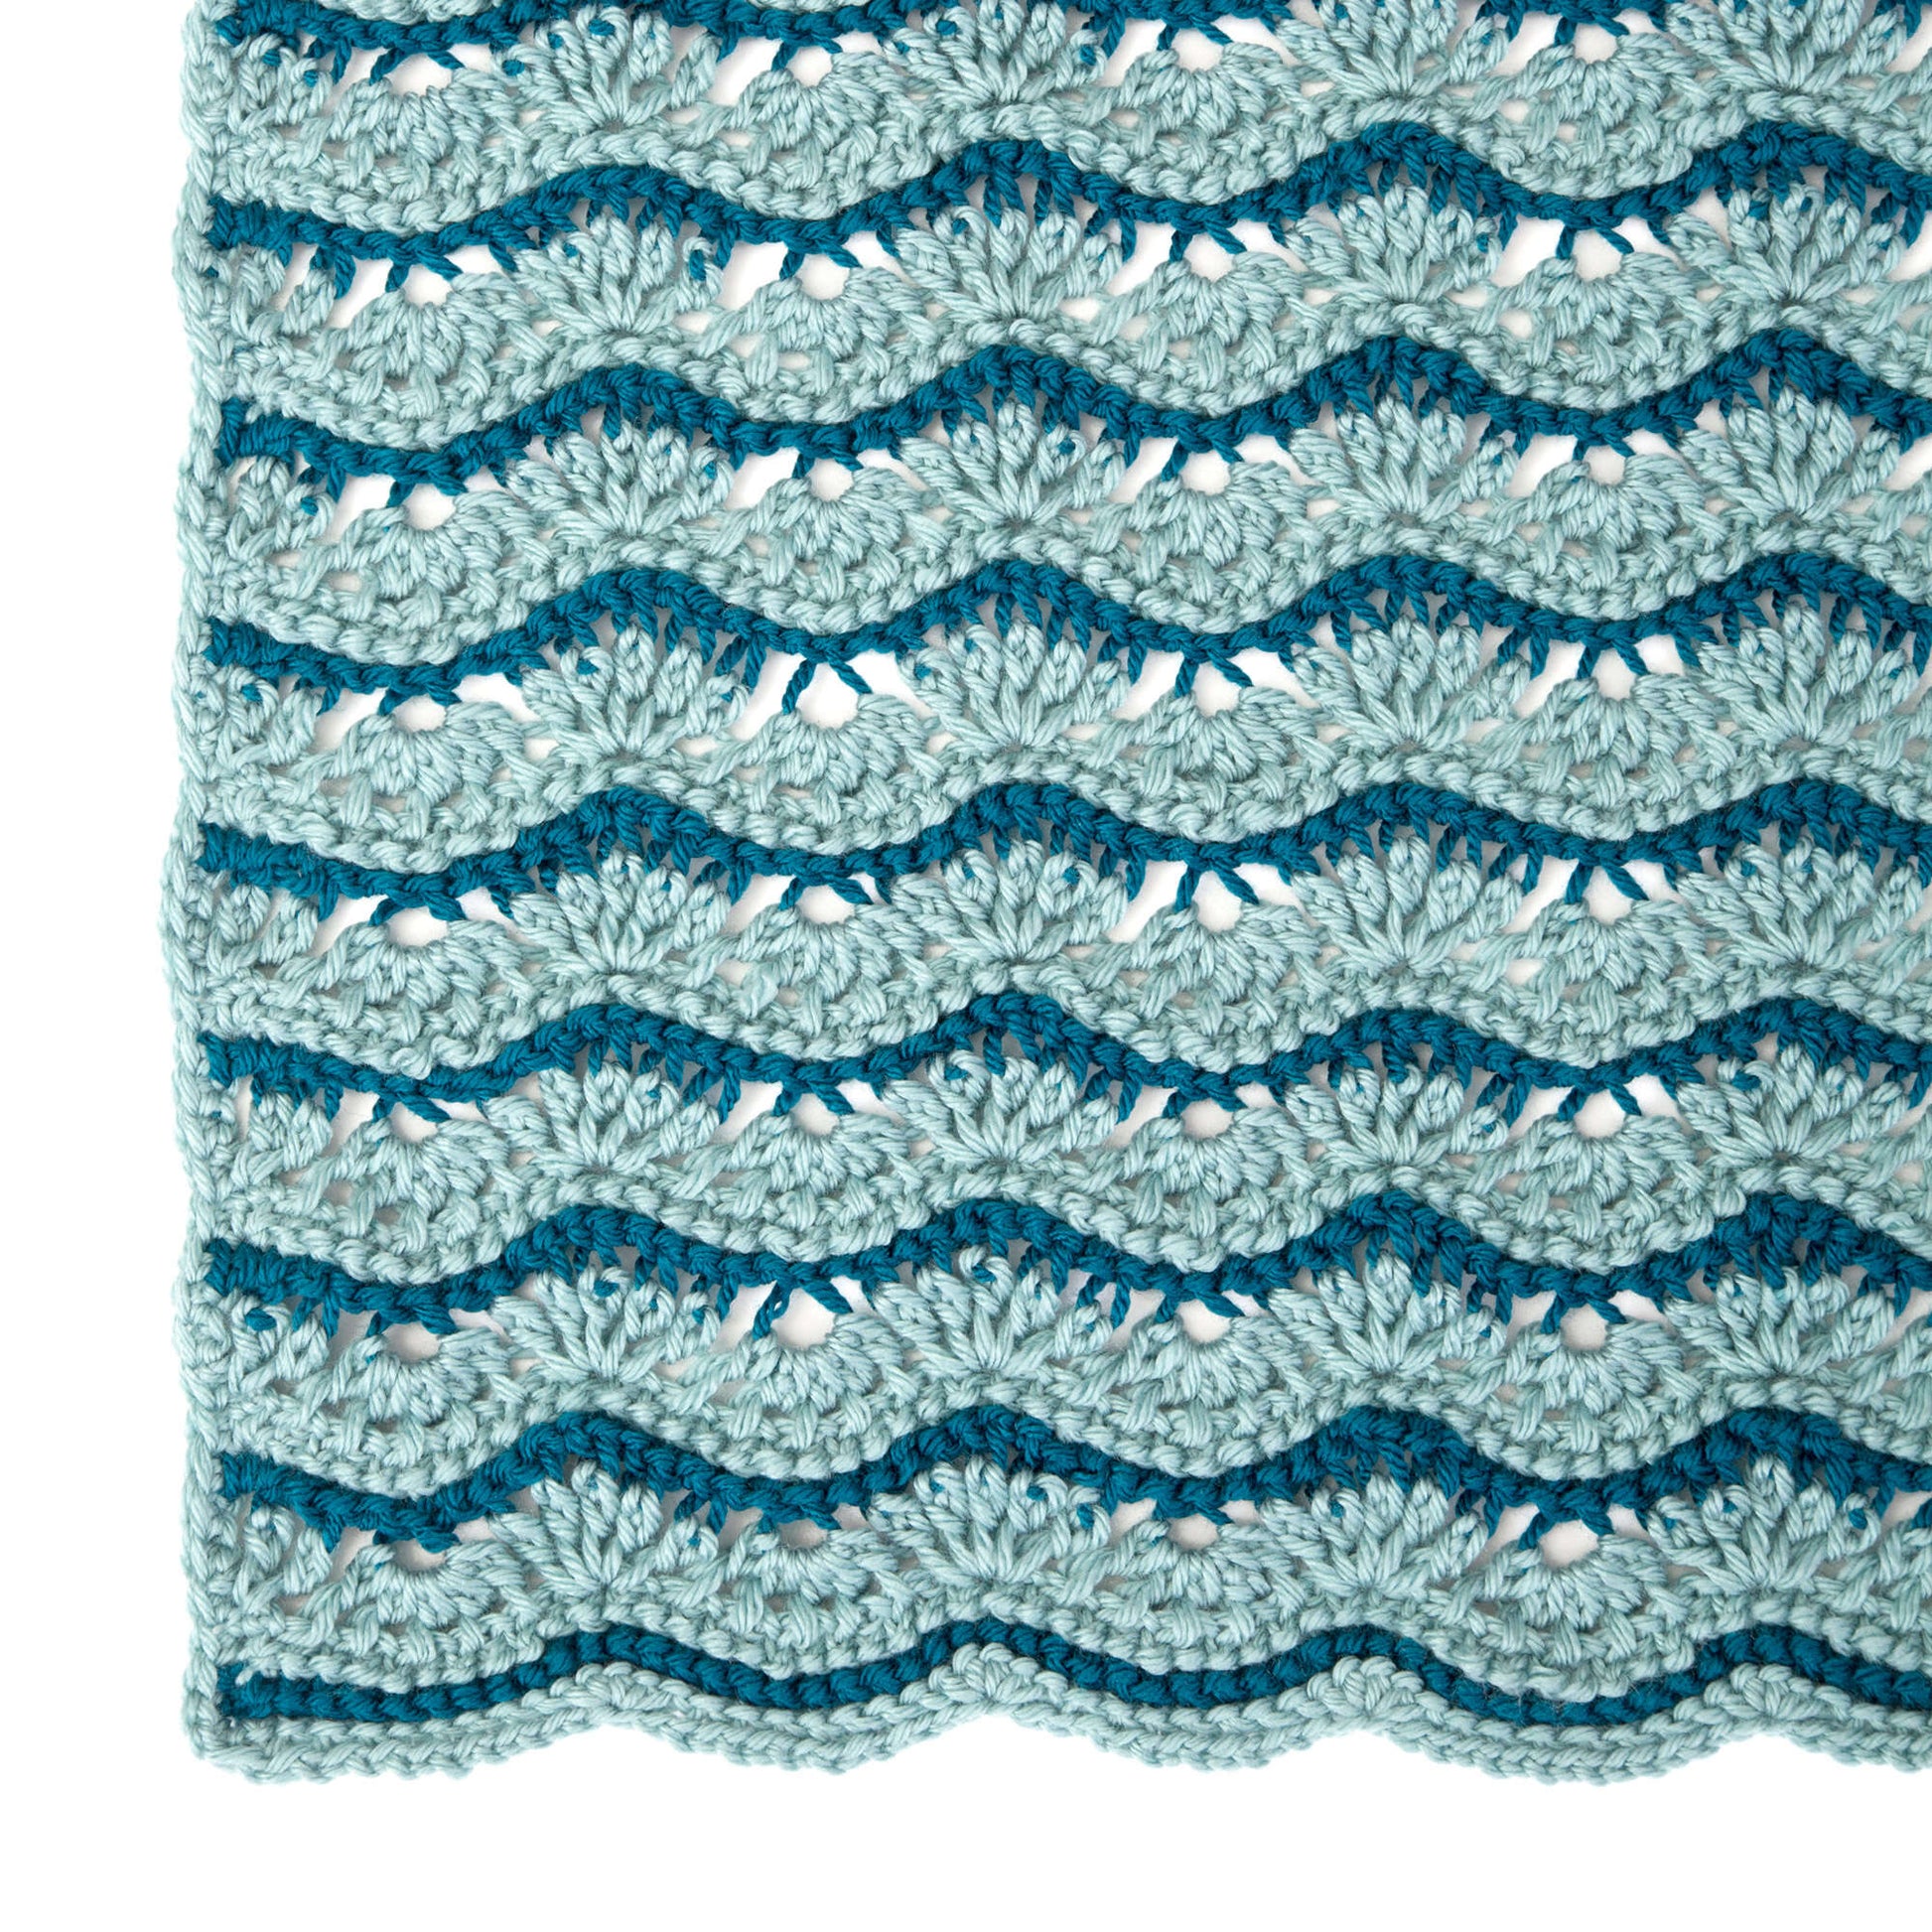 Free Red Heart Wistful Waves Lapghan Or Throw Crochet Pattern